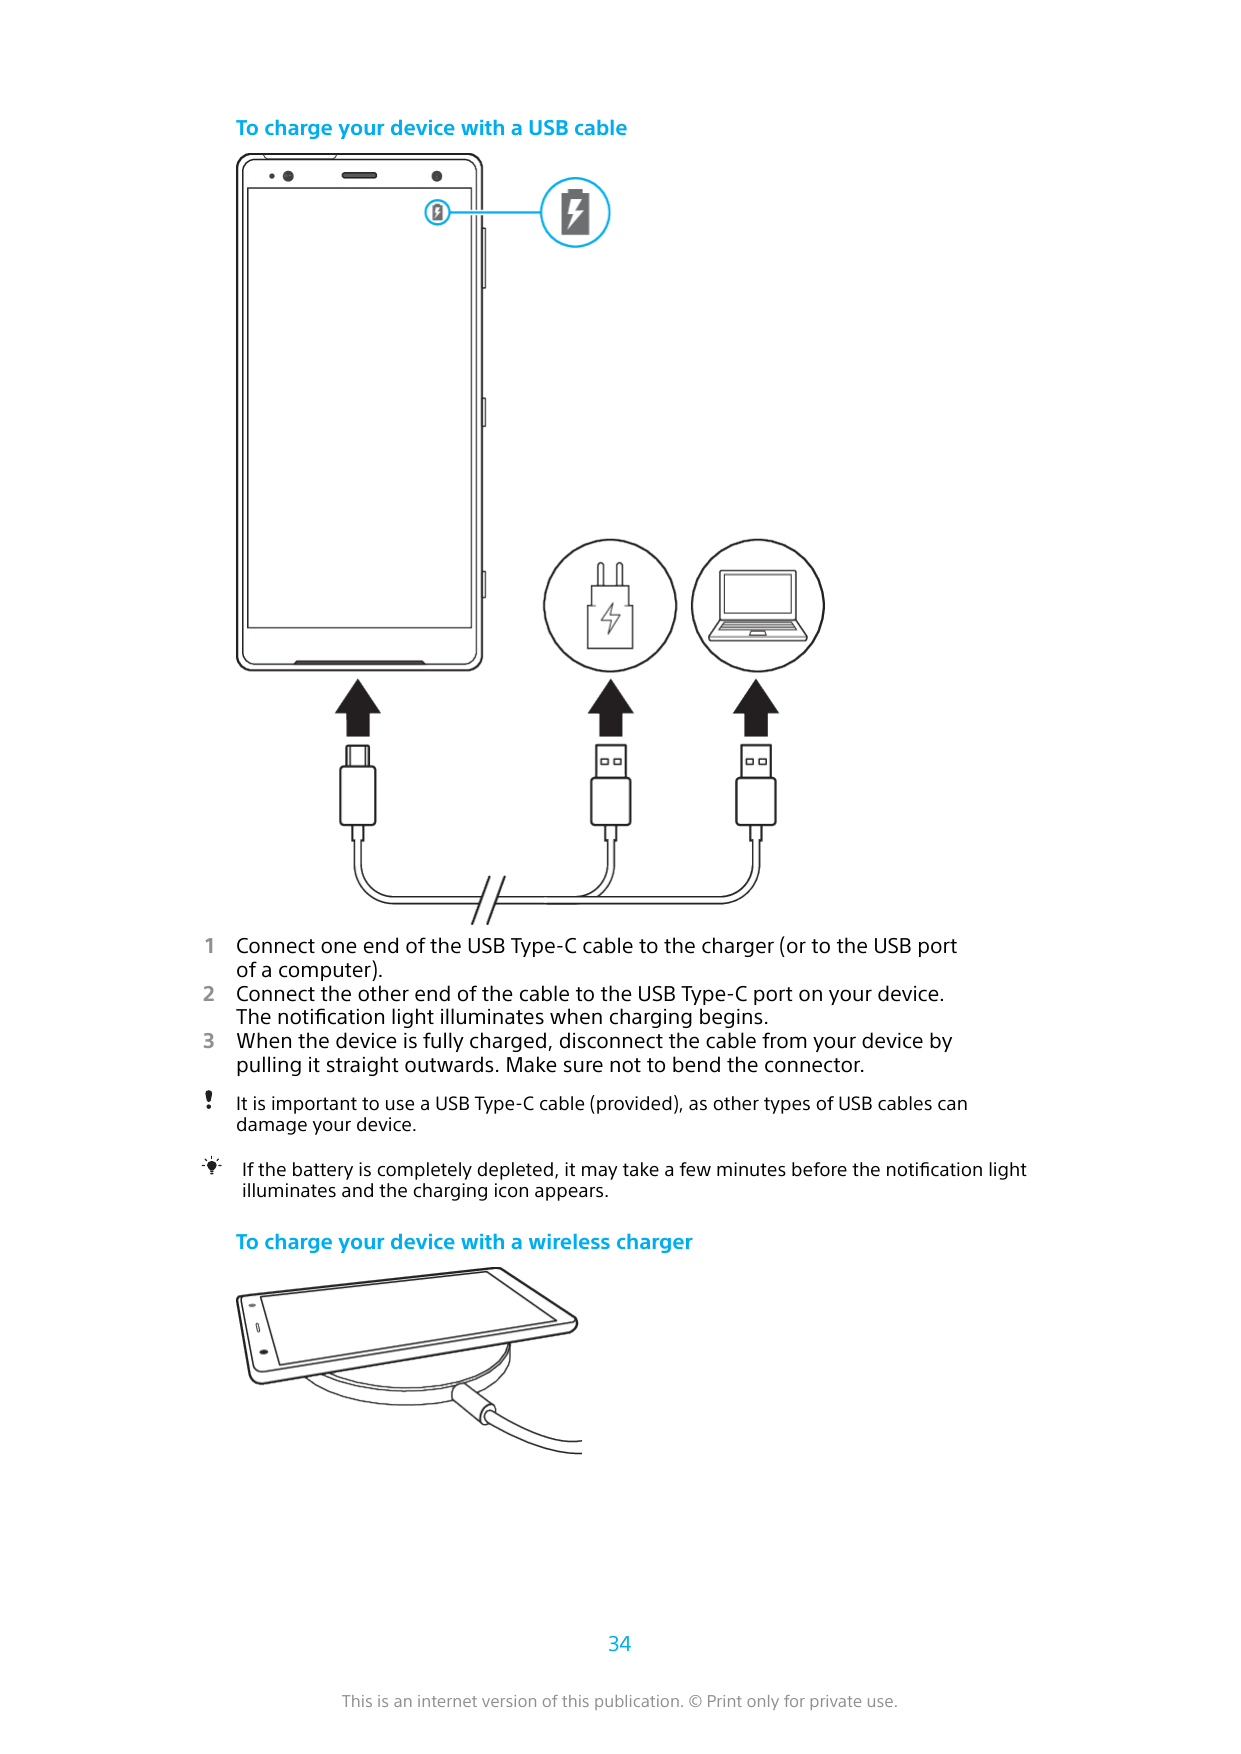 To charge your device with a USB cable123Connect one end of the USB Type-C cable to the charger (or to the USB portof a computer